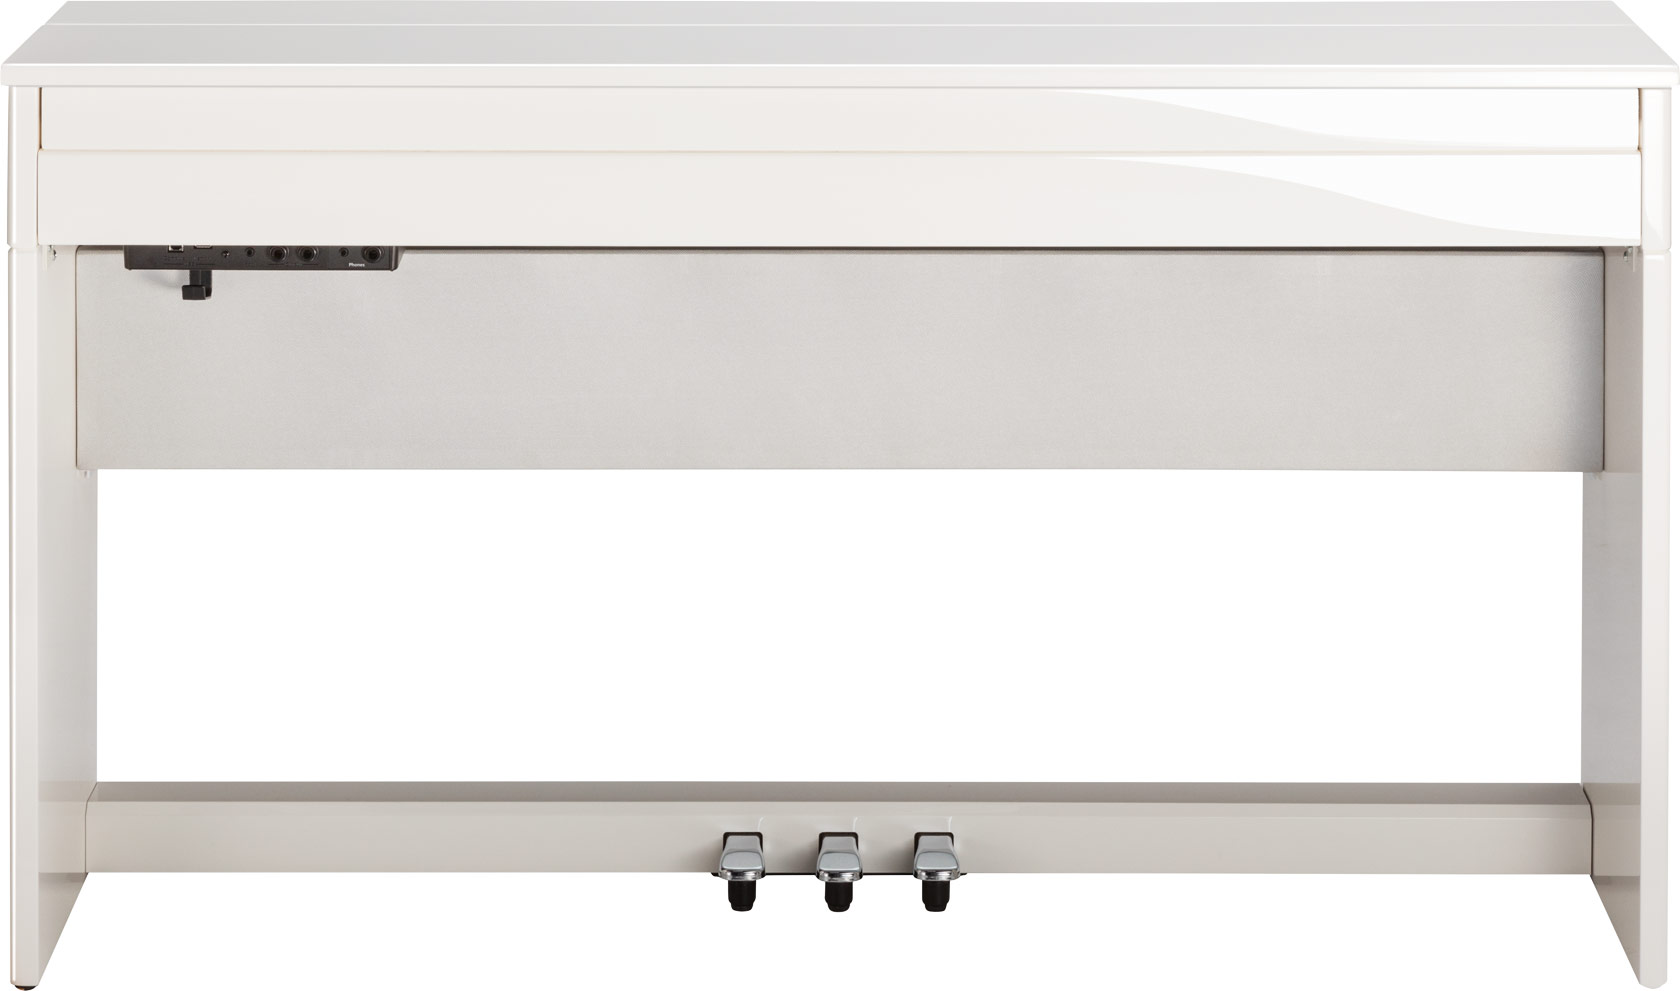 Roland Dp603 - Polished White - Piano digital con mueble - Variation 1